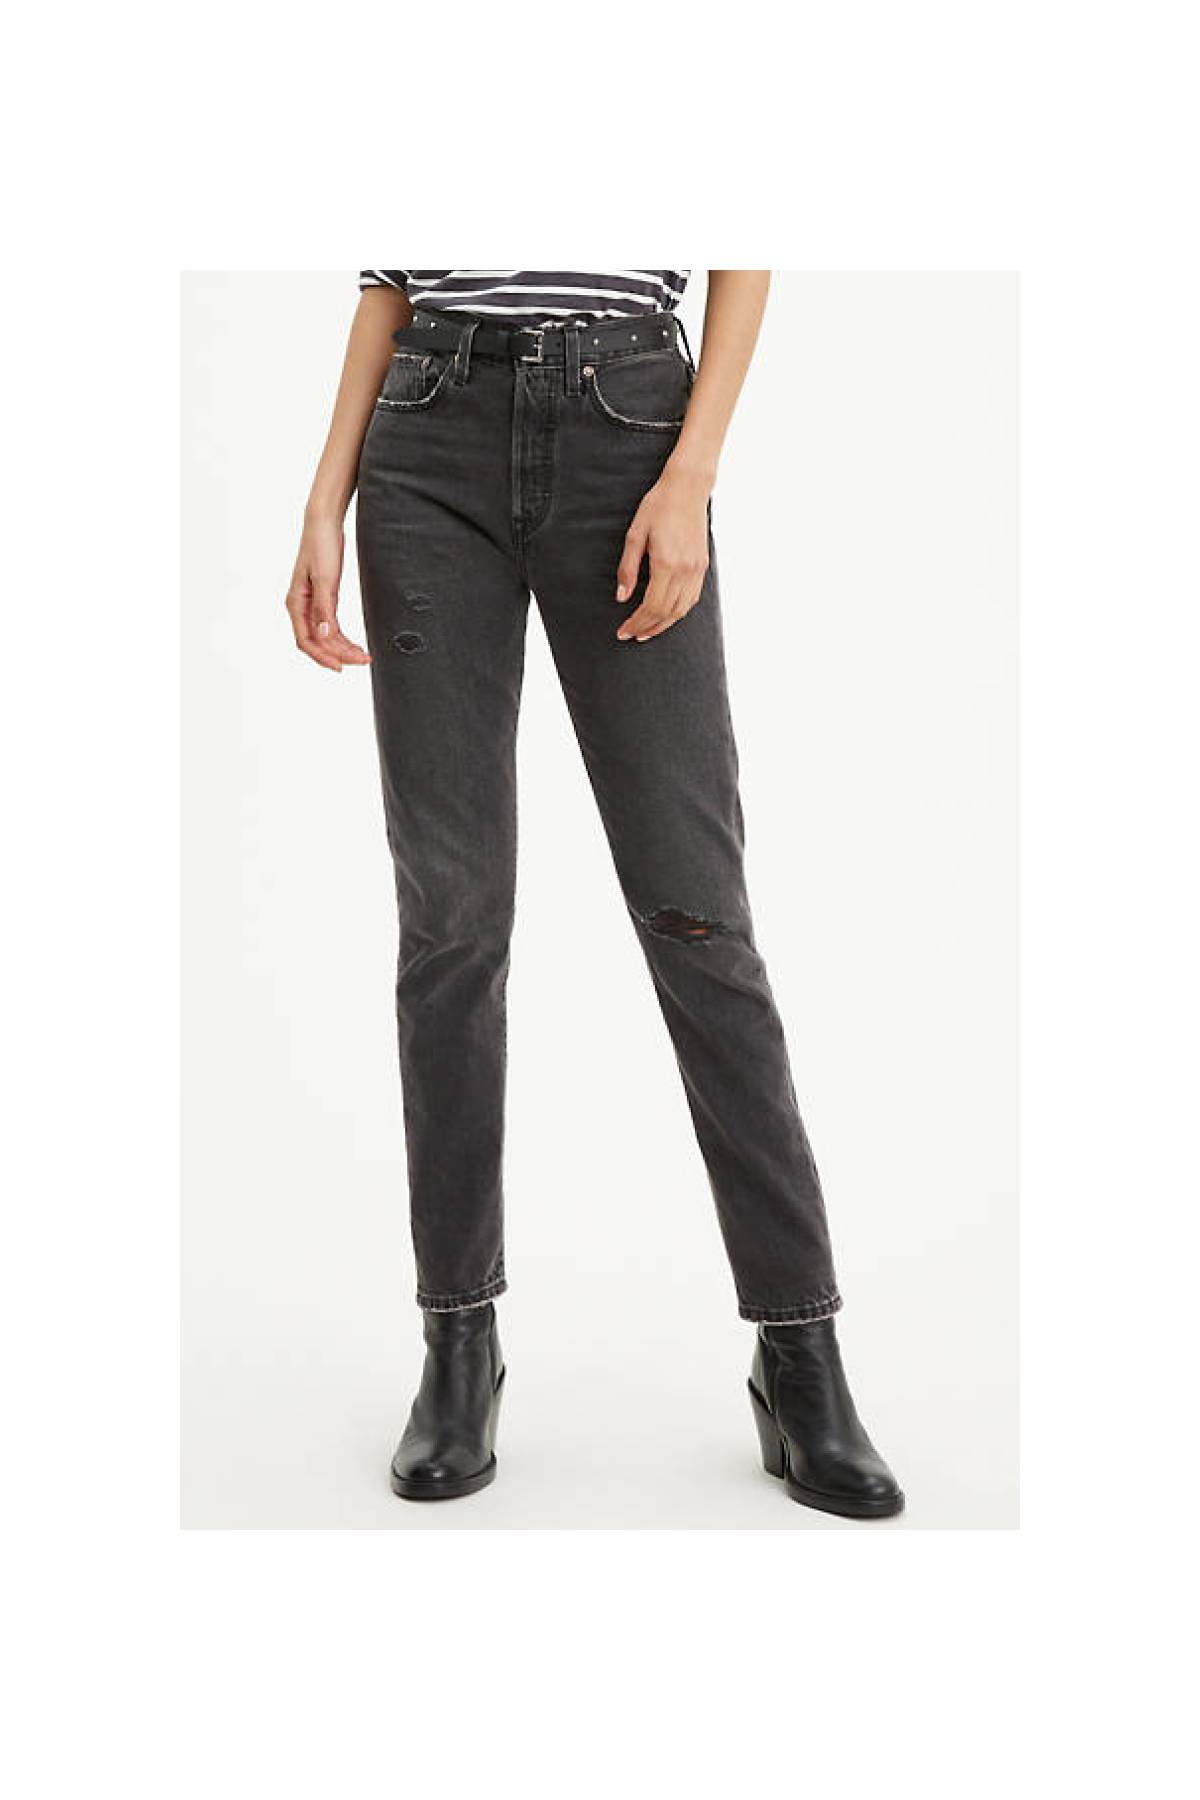 kupon Allieret Aktiver Women's Jean Fit Guide - Types of Jean Fits & Styles | Levi's® US